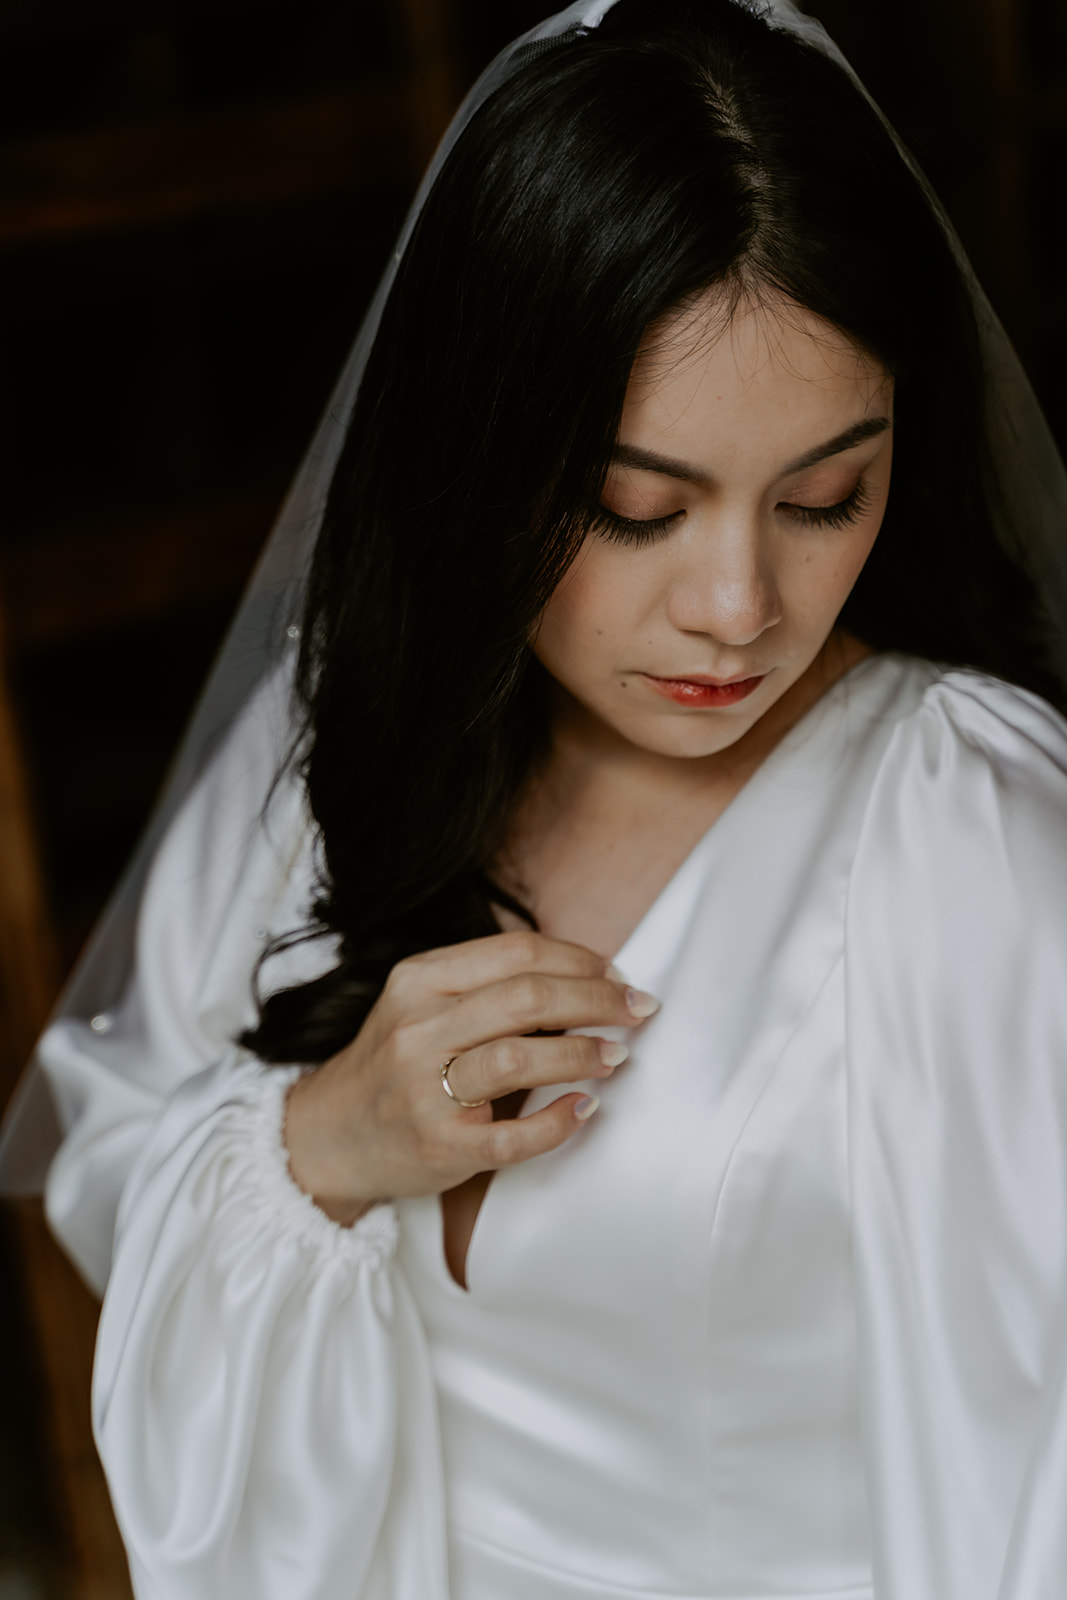 A bride in a white robe and veil, looking down while adjusting her necklace, showcasing a moment of quiet elegance.